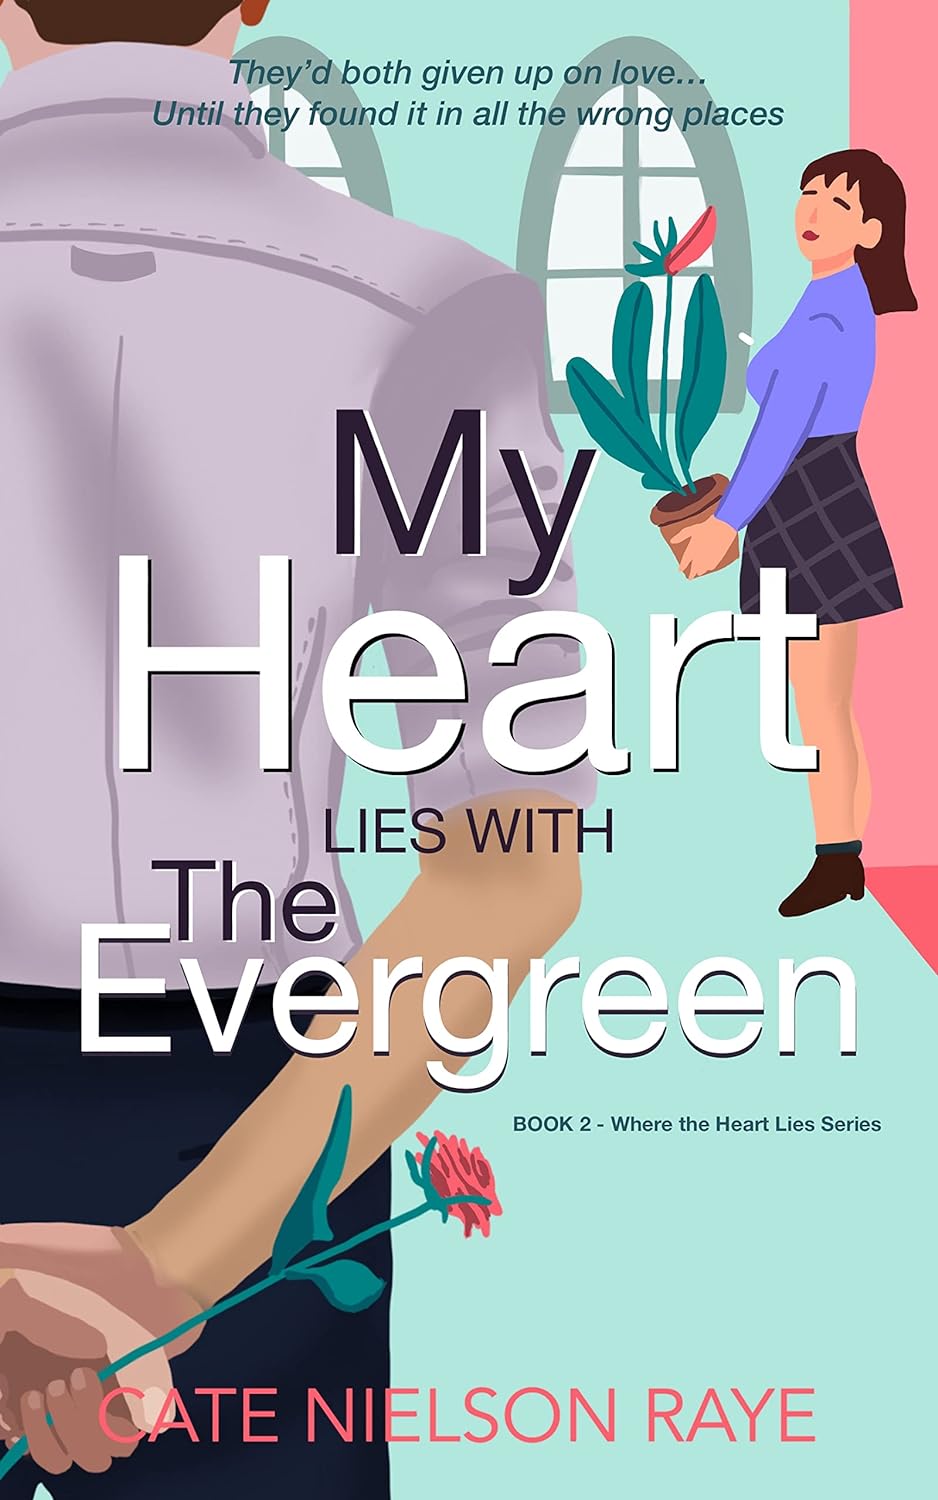 My Heart lies with The Evergreen